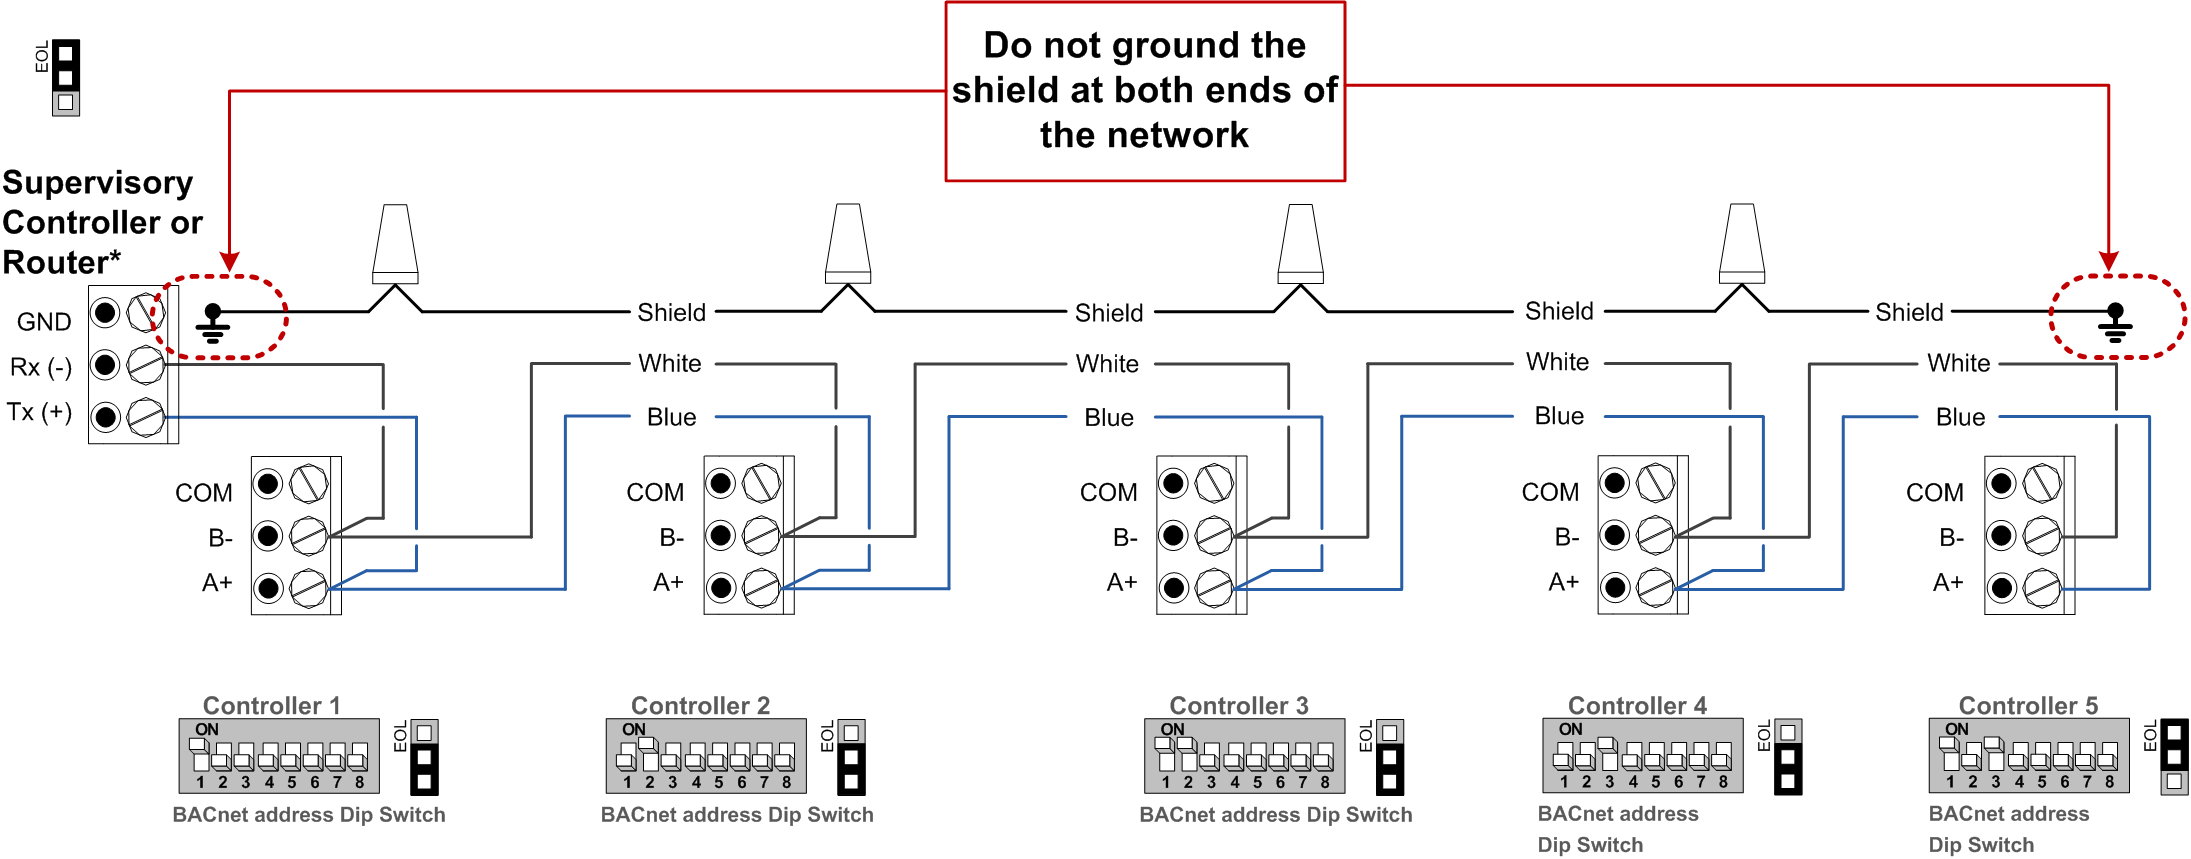 BACnet Wiring (Part 1 of 3)